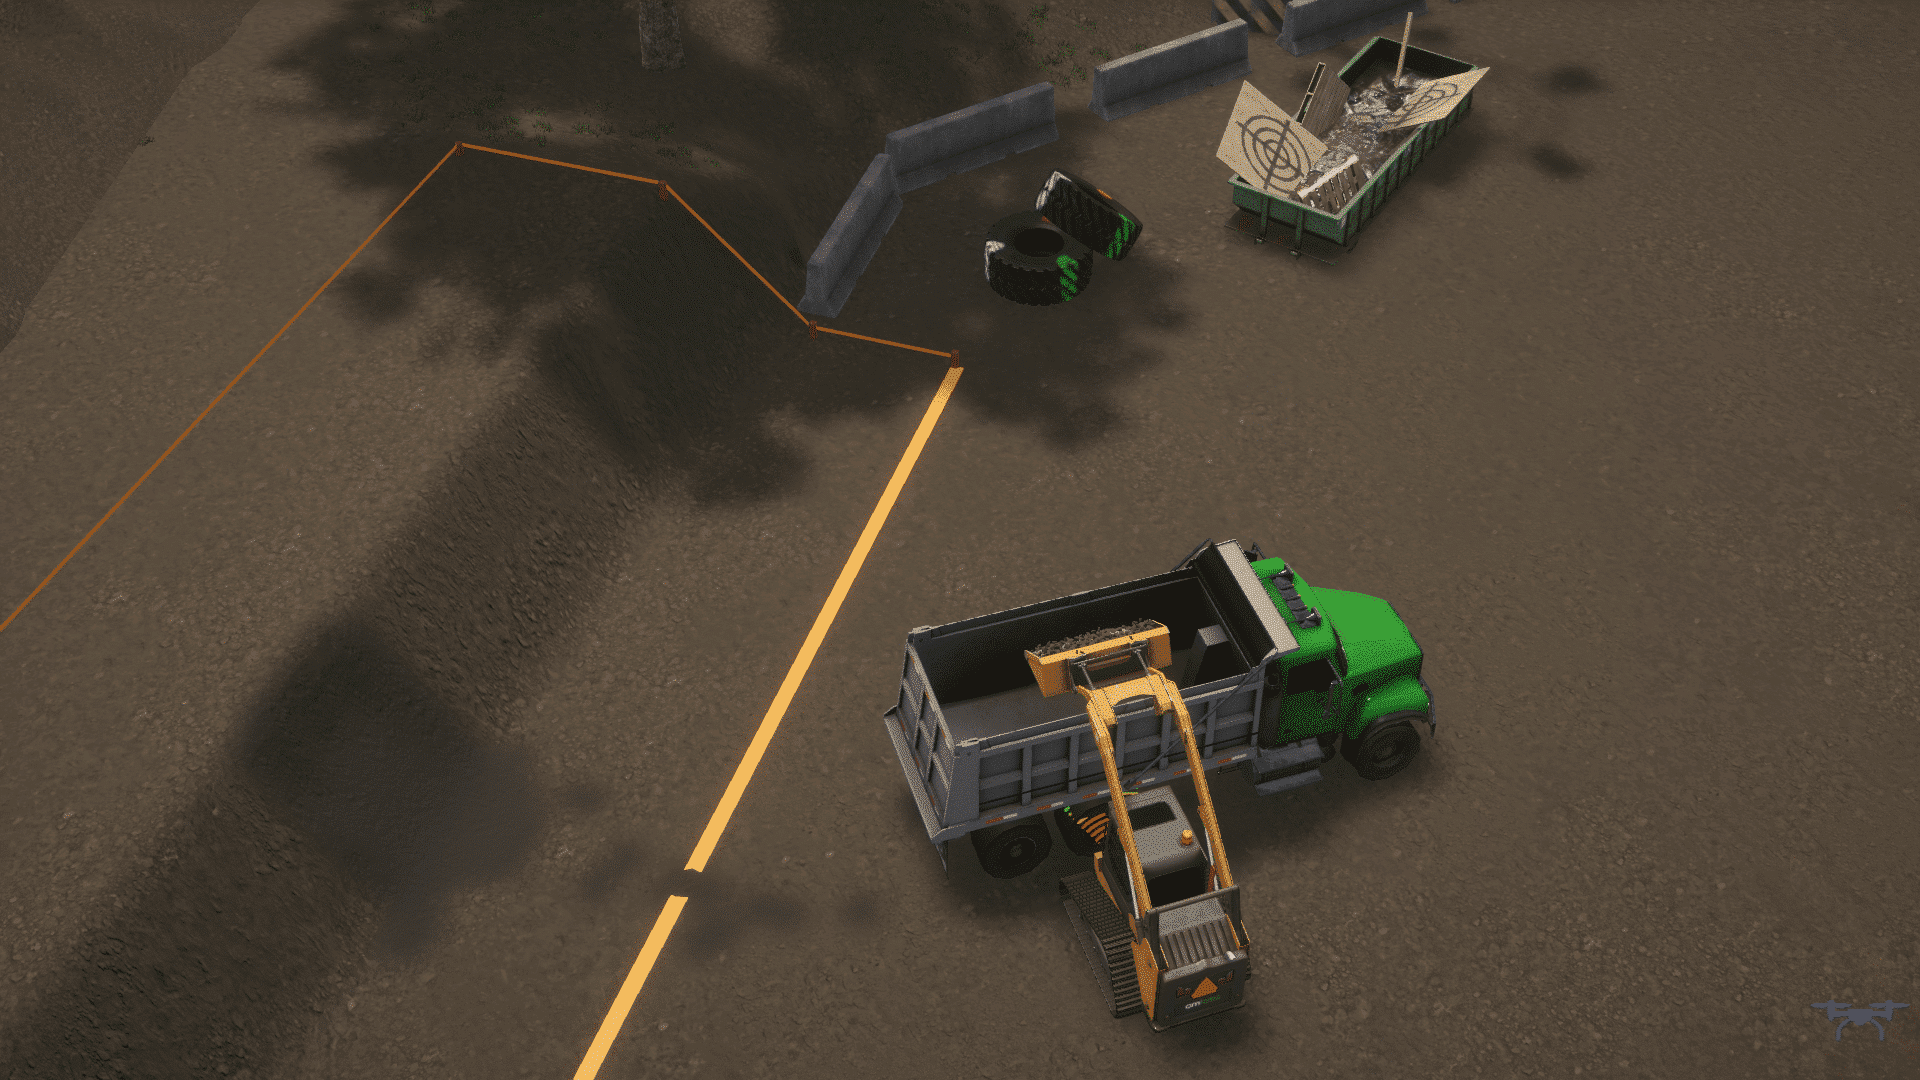 Compact Track Loader Simulator Training Pack – Truck Loading overview shot